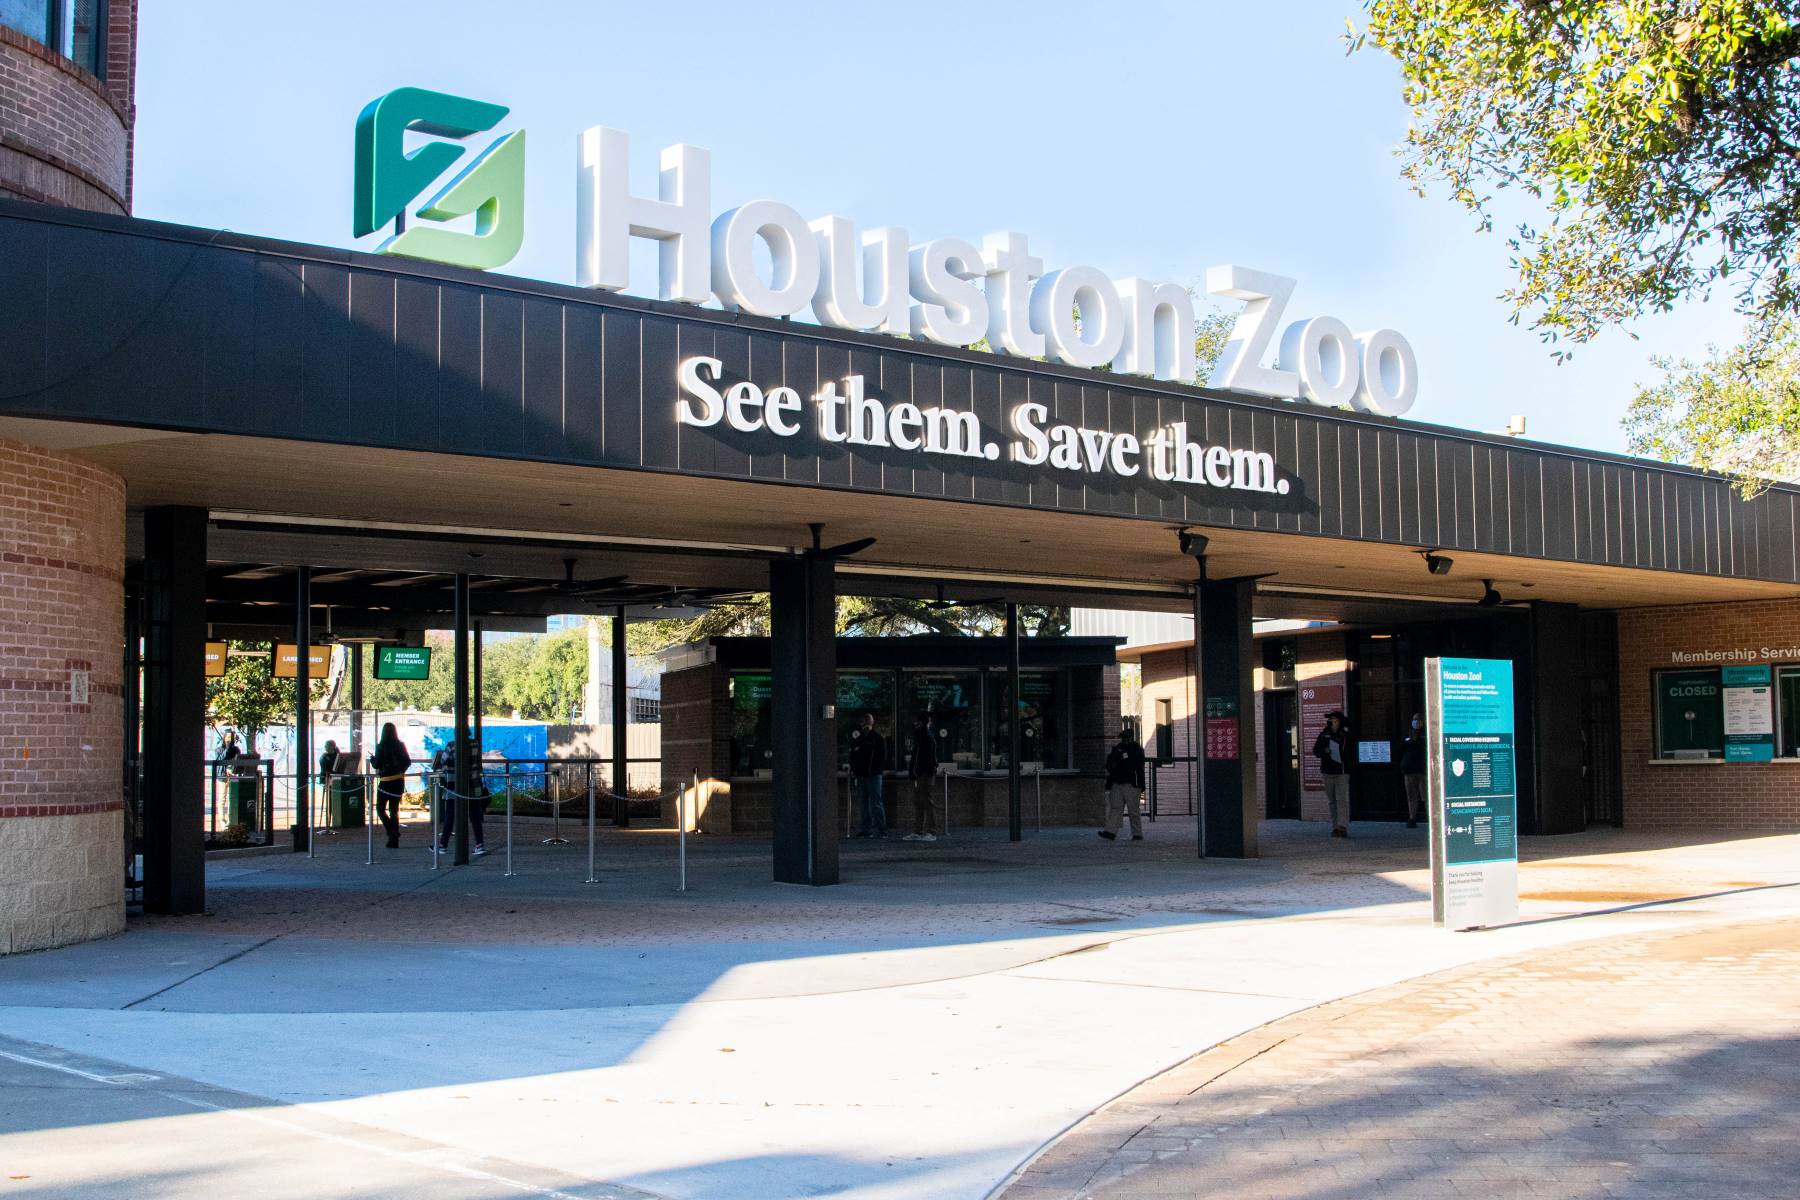 18-extraordinary-facts-about-houston-zoo